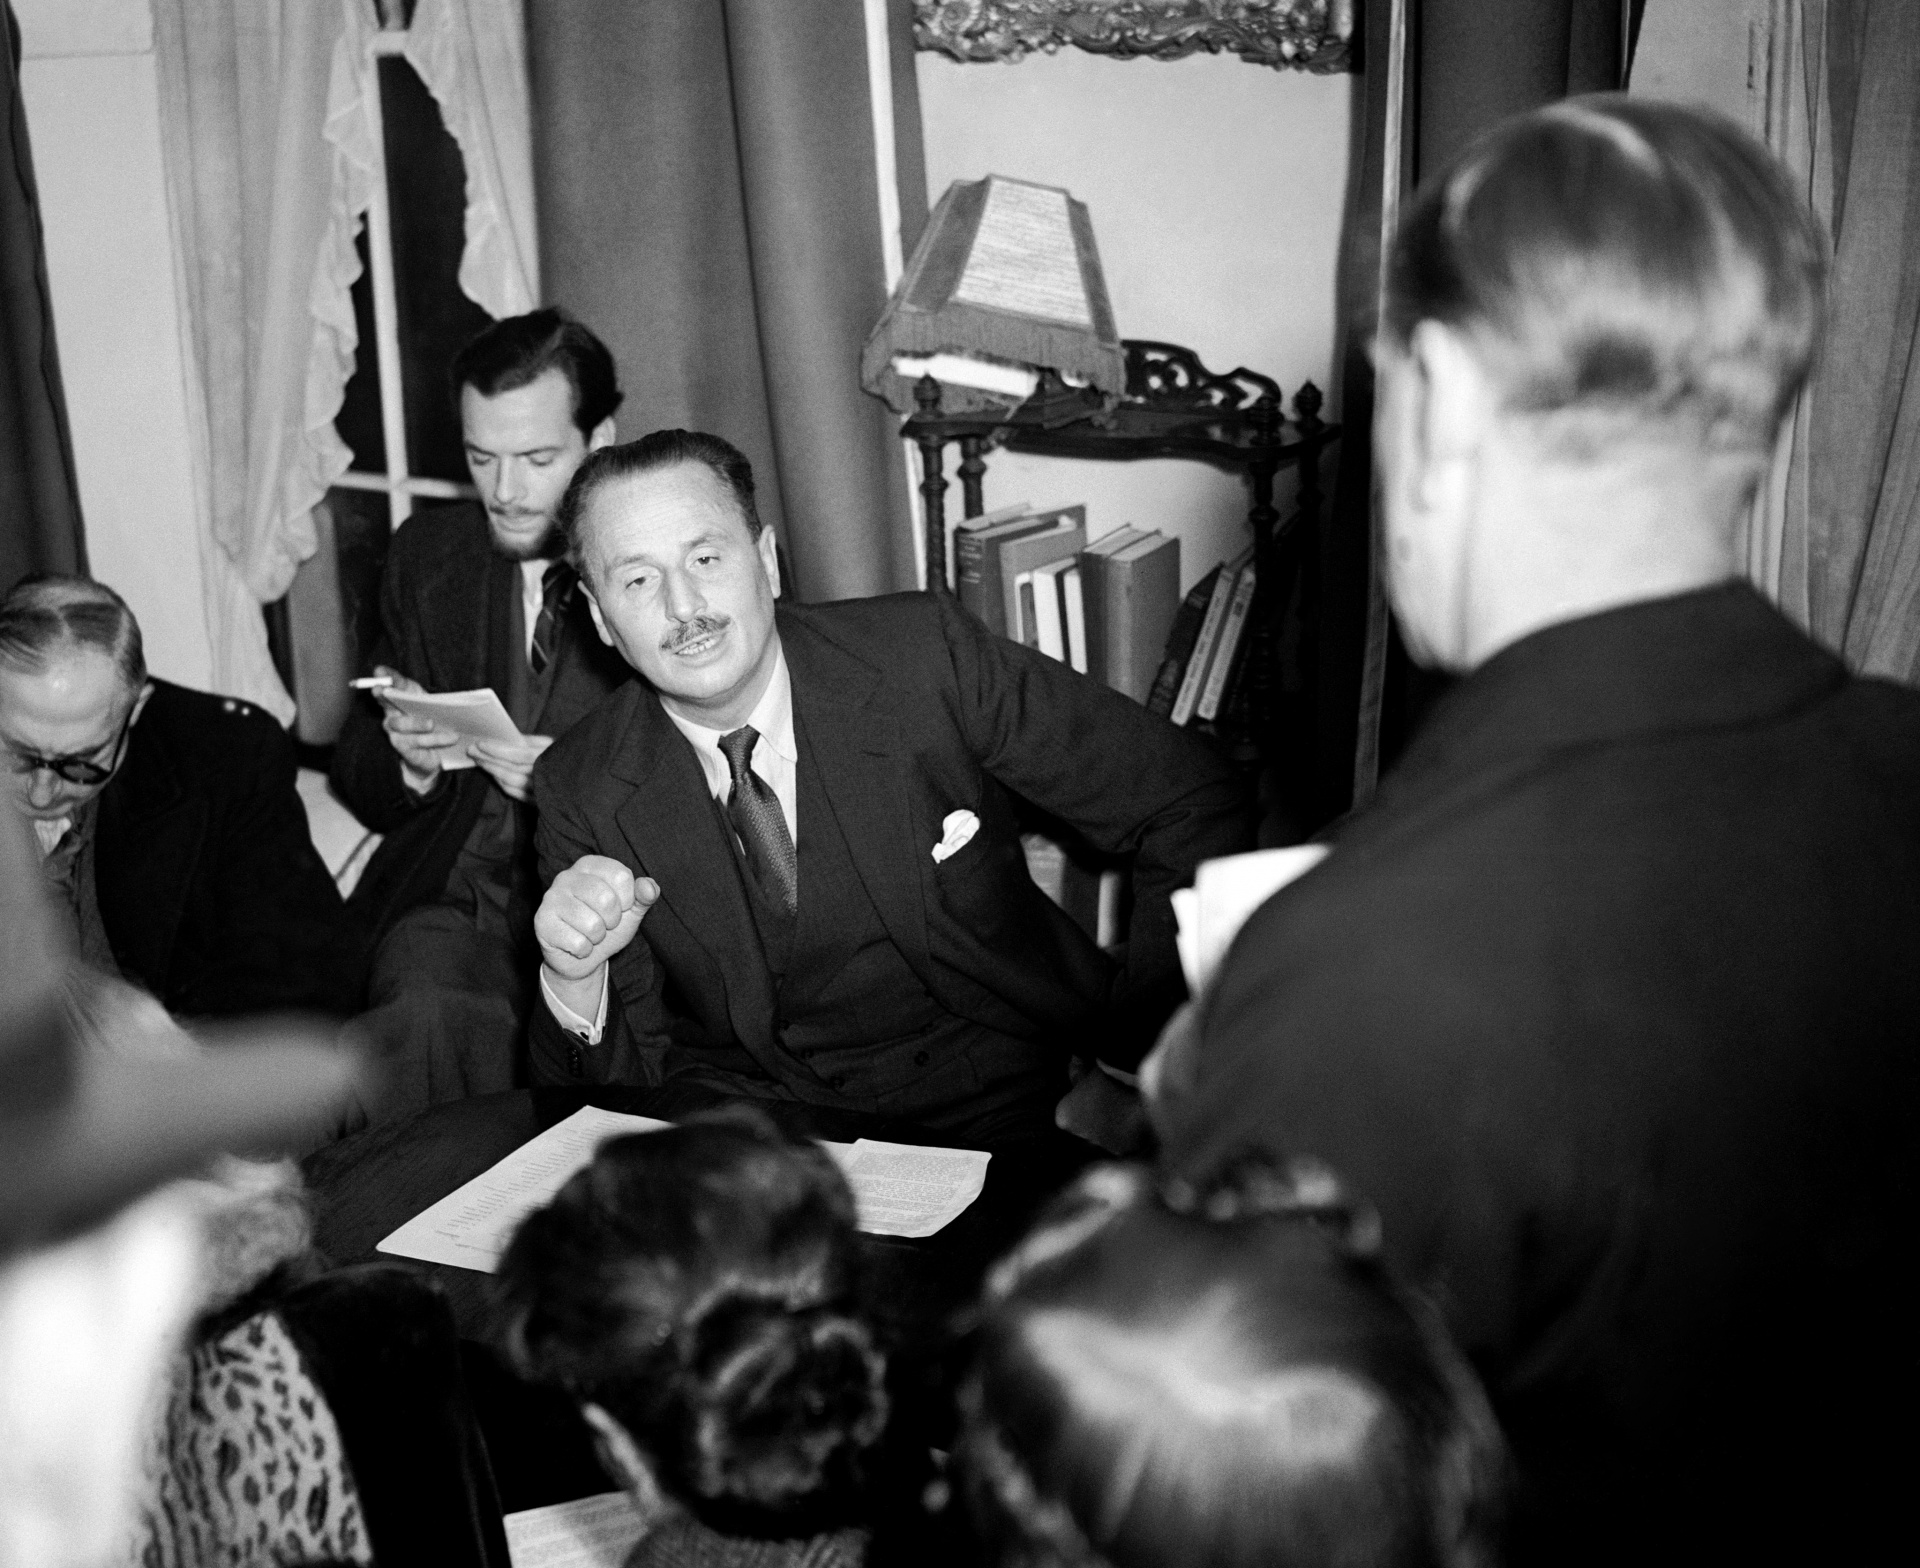 Sir Oswald Mosley announces his plans for a new "Union Movement" to replace his British Union of Fascists, London, 1947